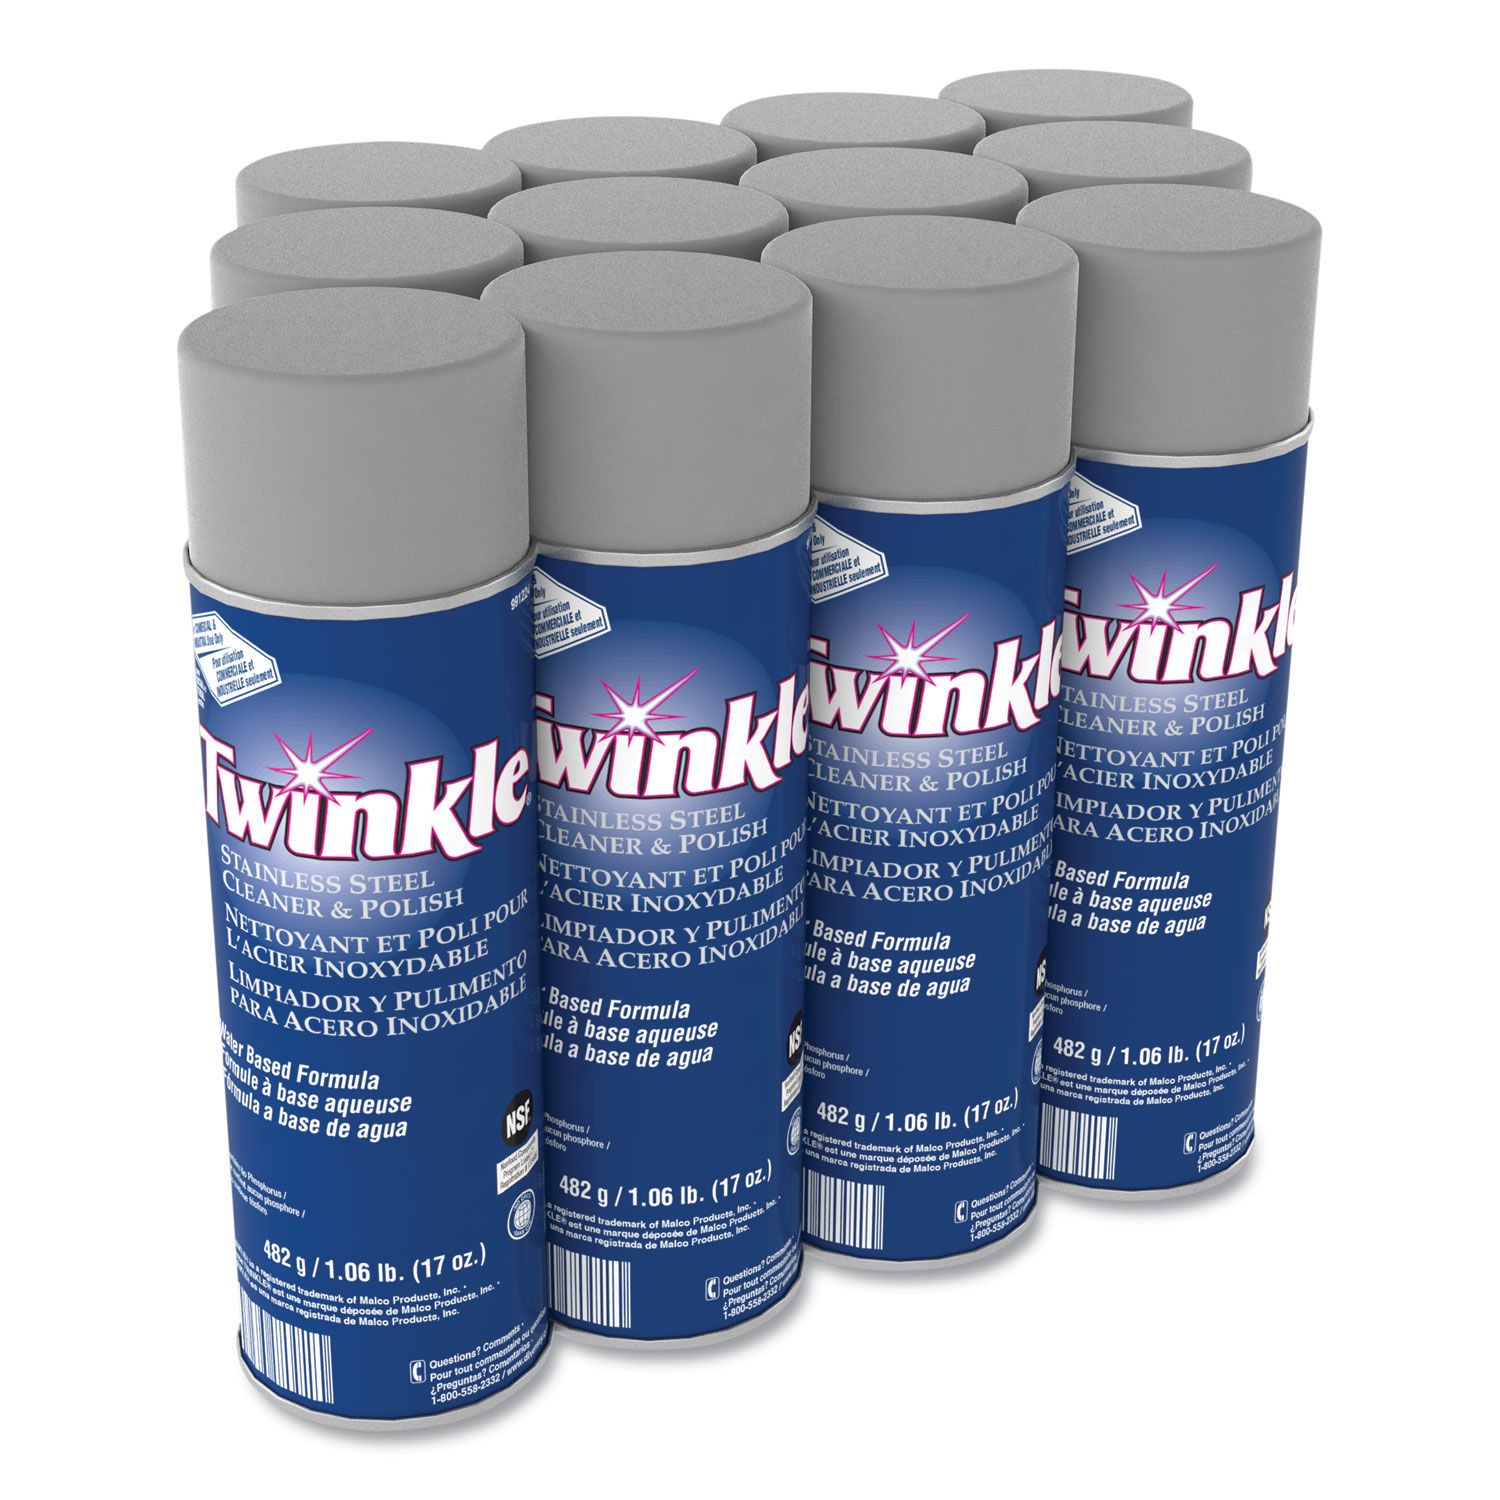 Twinkle Stainless Steel Cleaner and Polish, 17 oz Aerosol Spray, 12/Carton